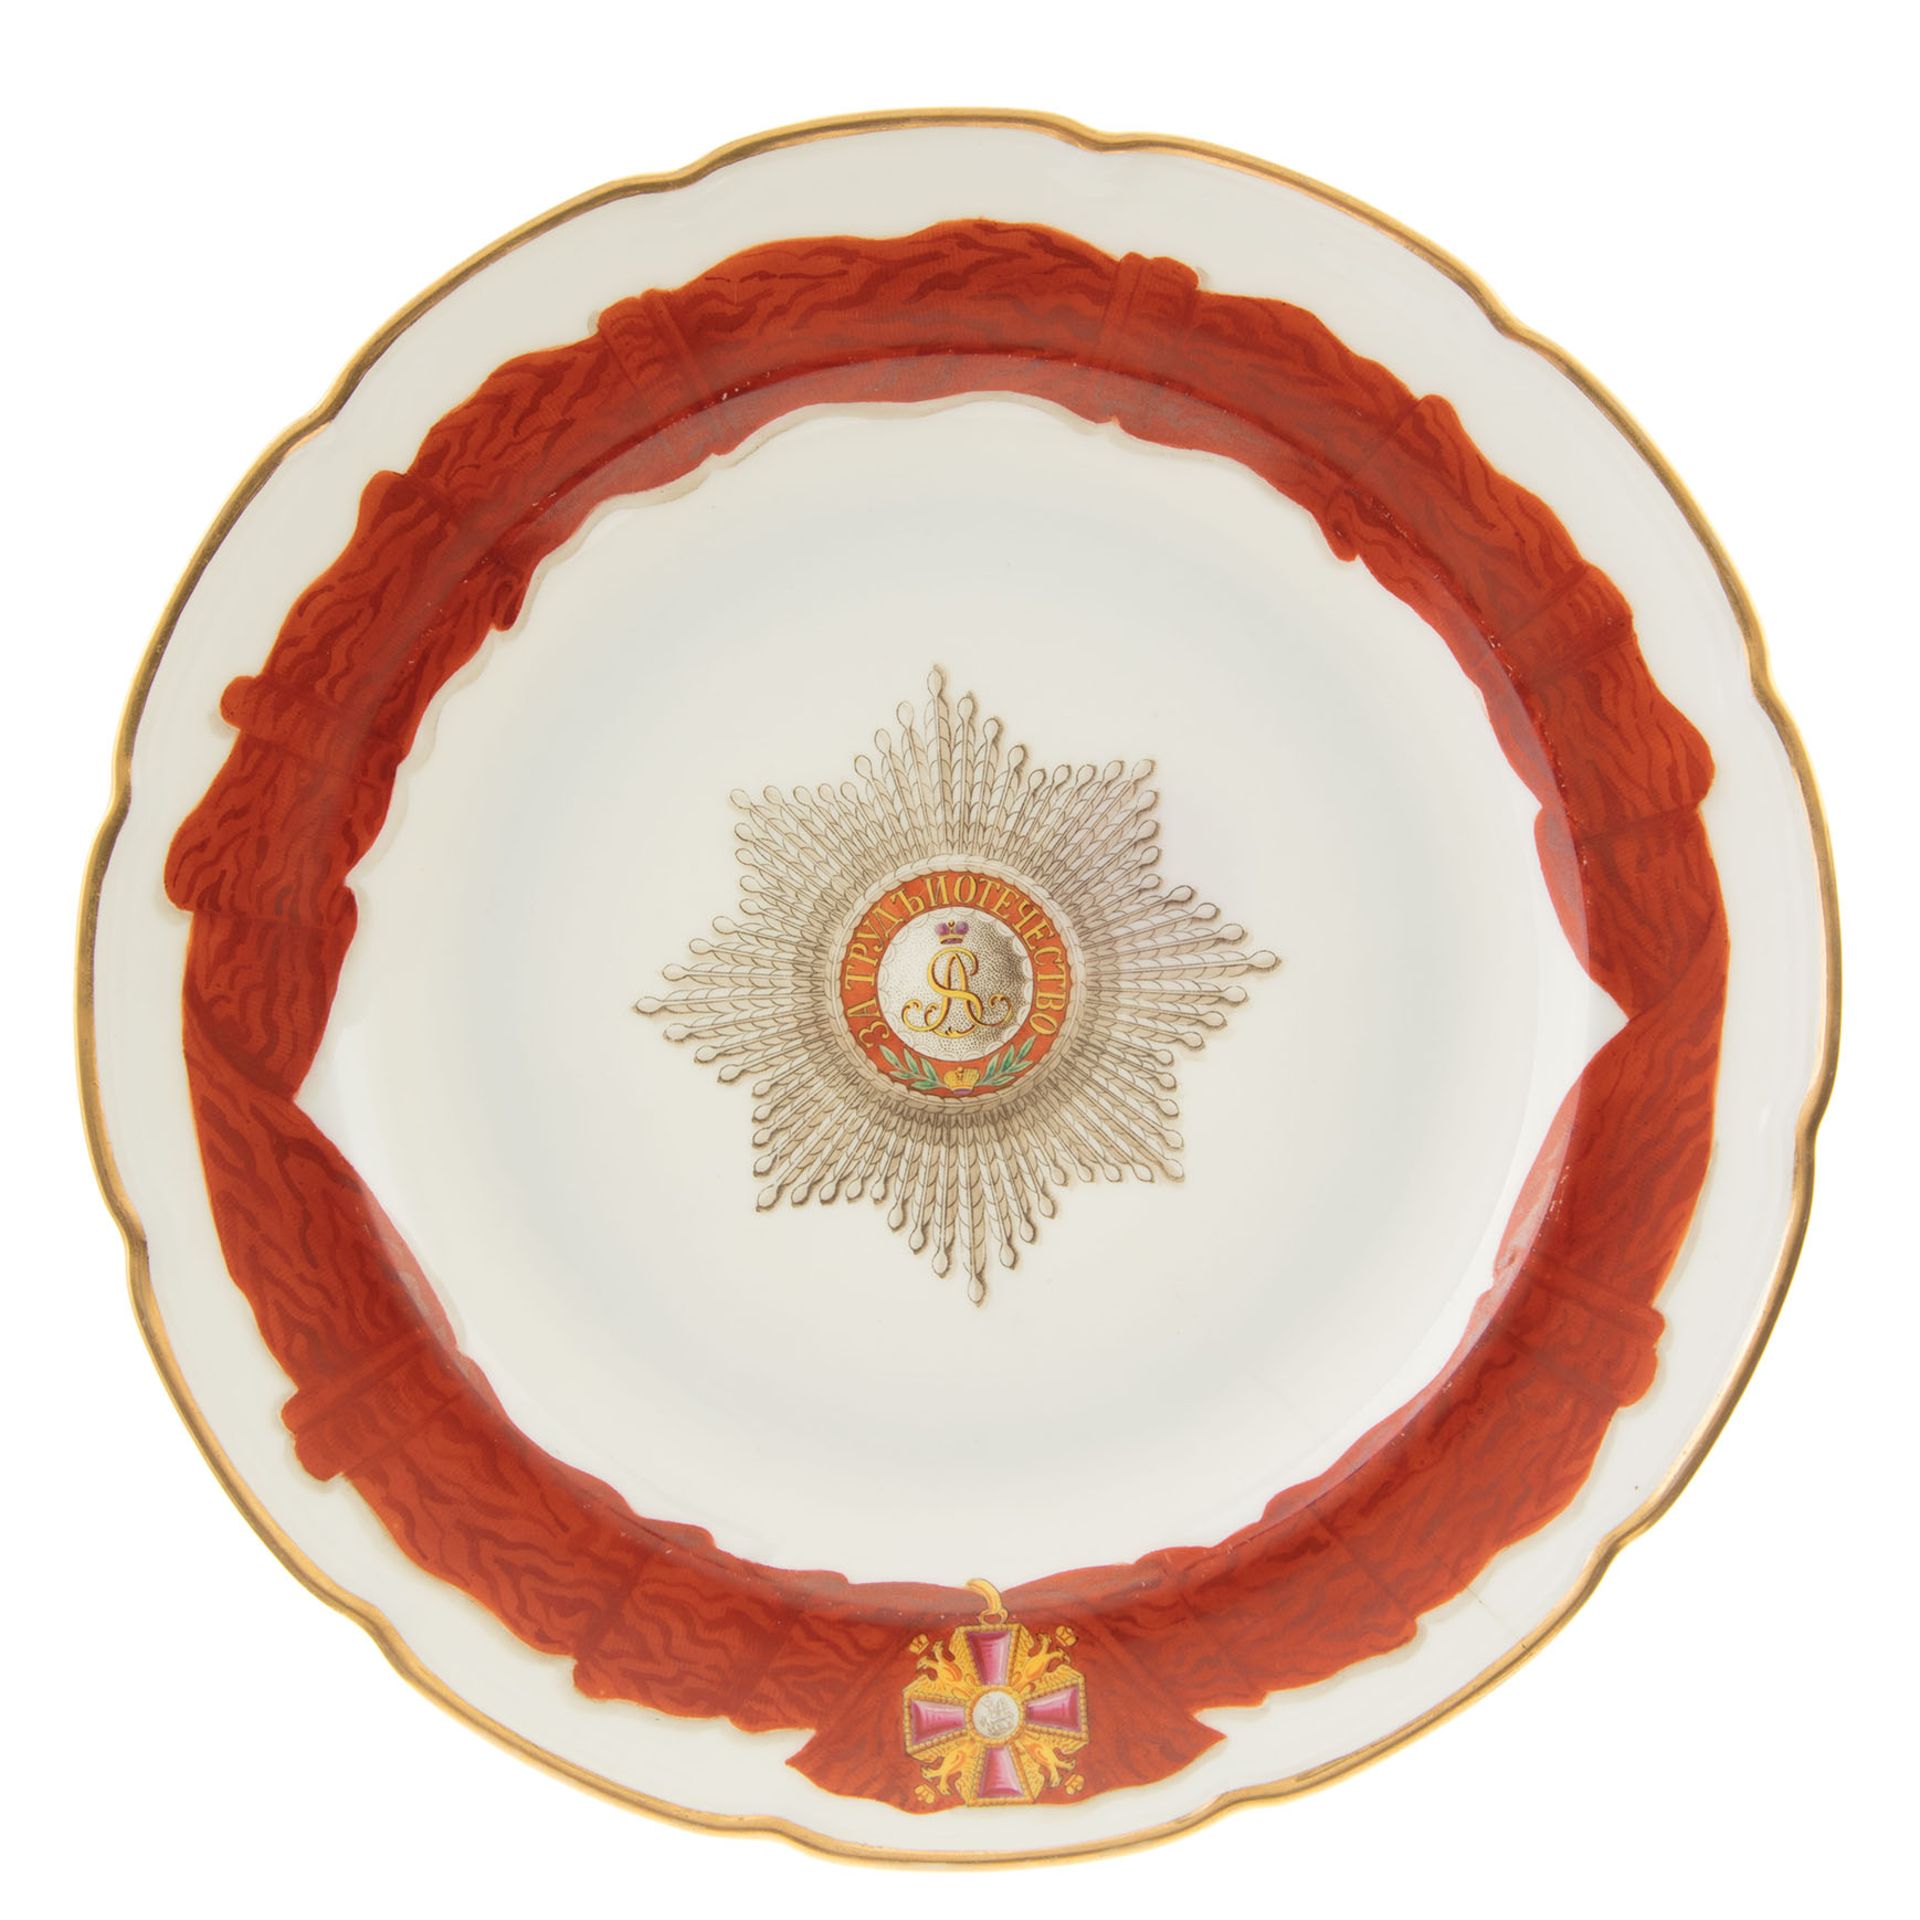 PORECELAIN PLATE FROM THE PALACE ‘MEDAL’ SERVICE « MEDAL » OF ST. ALEXANDER [...]